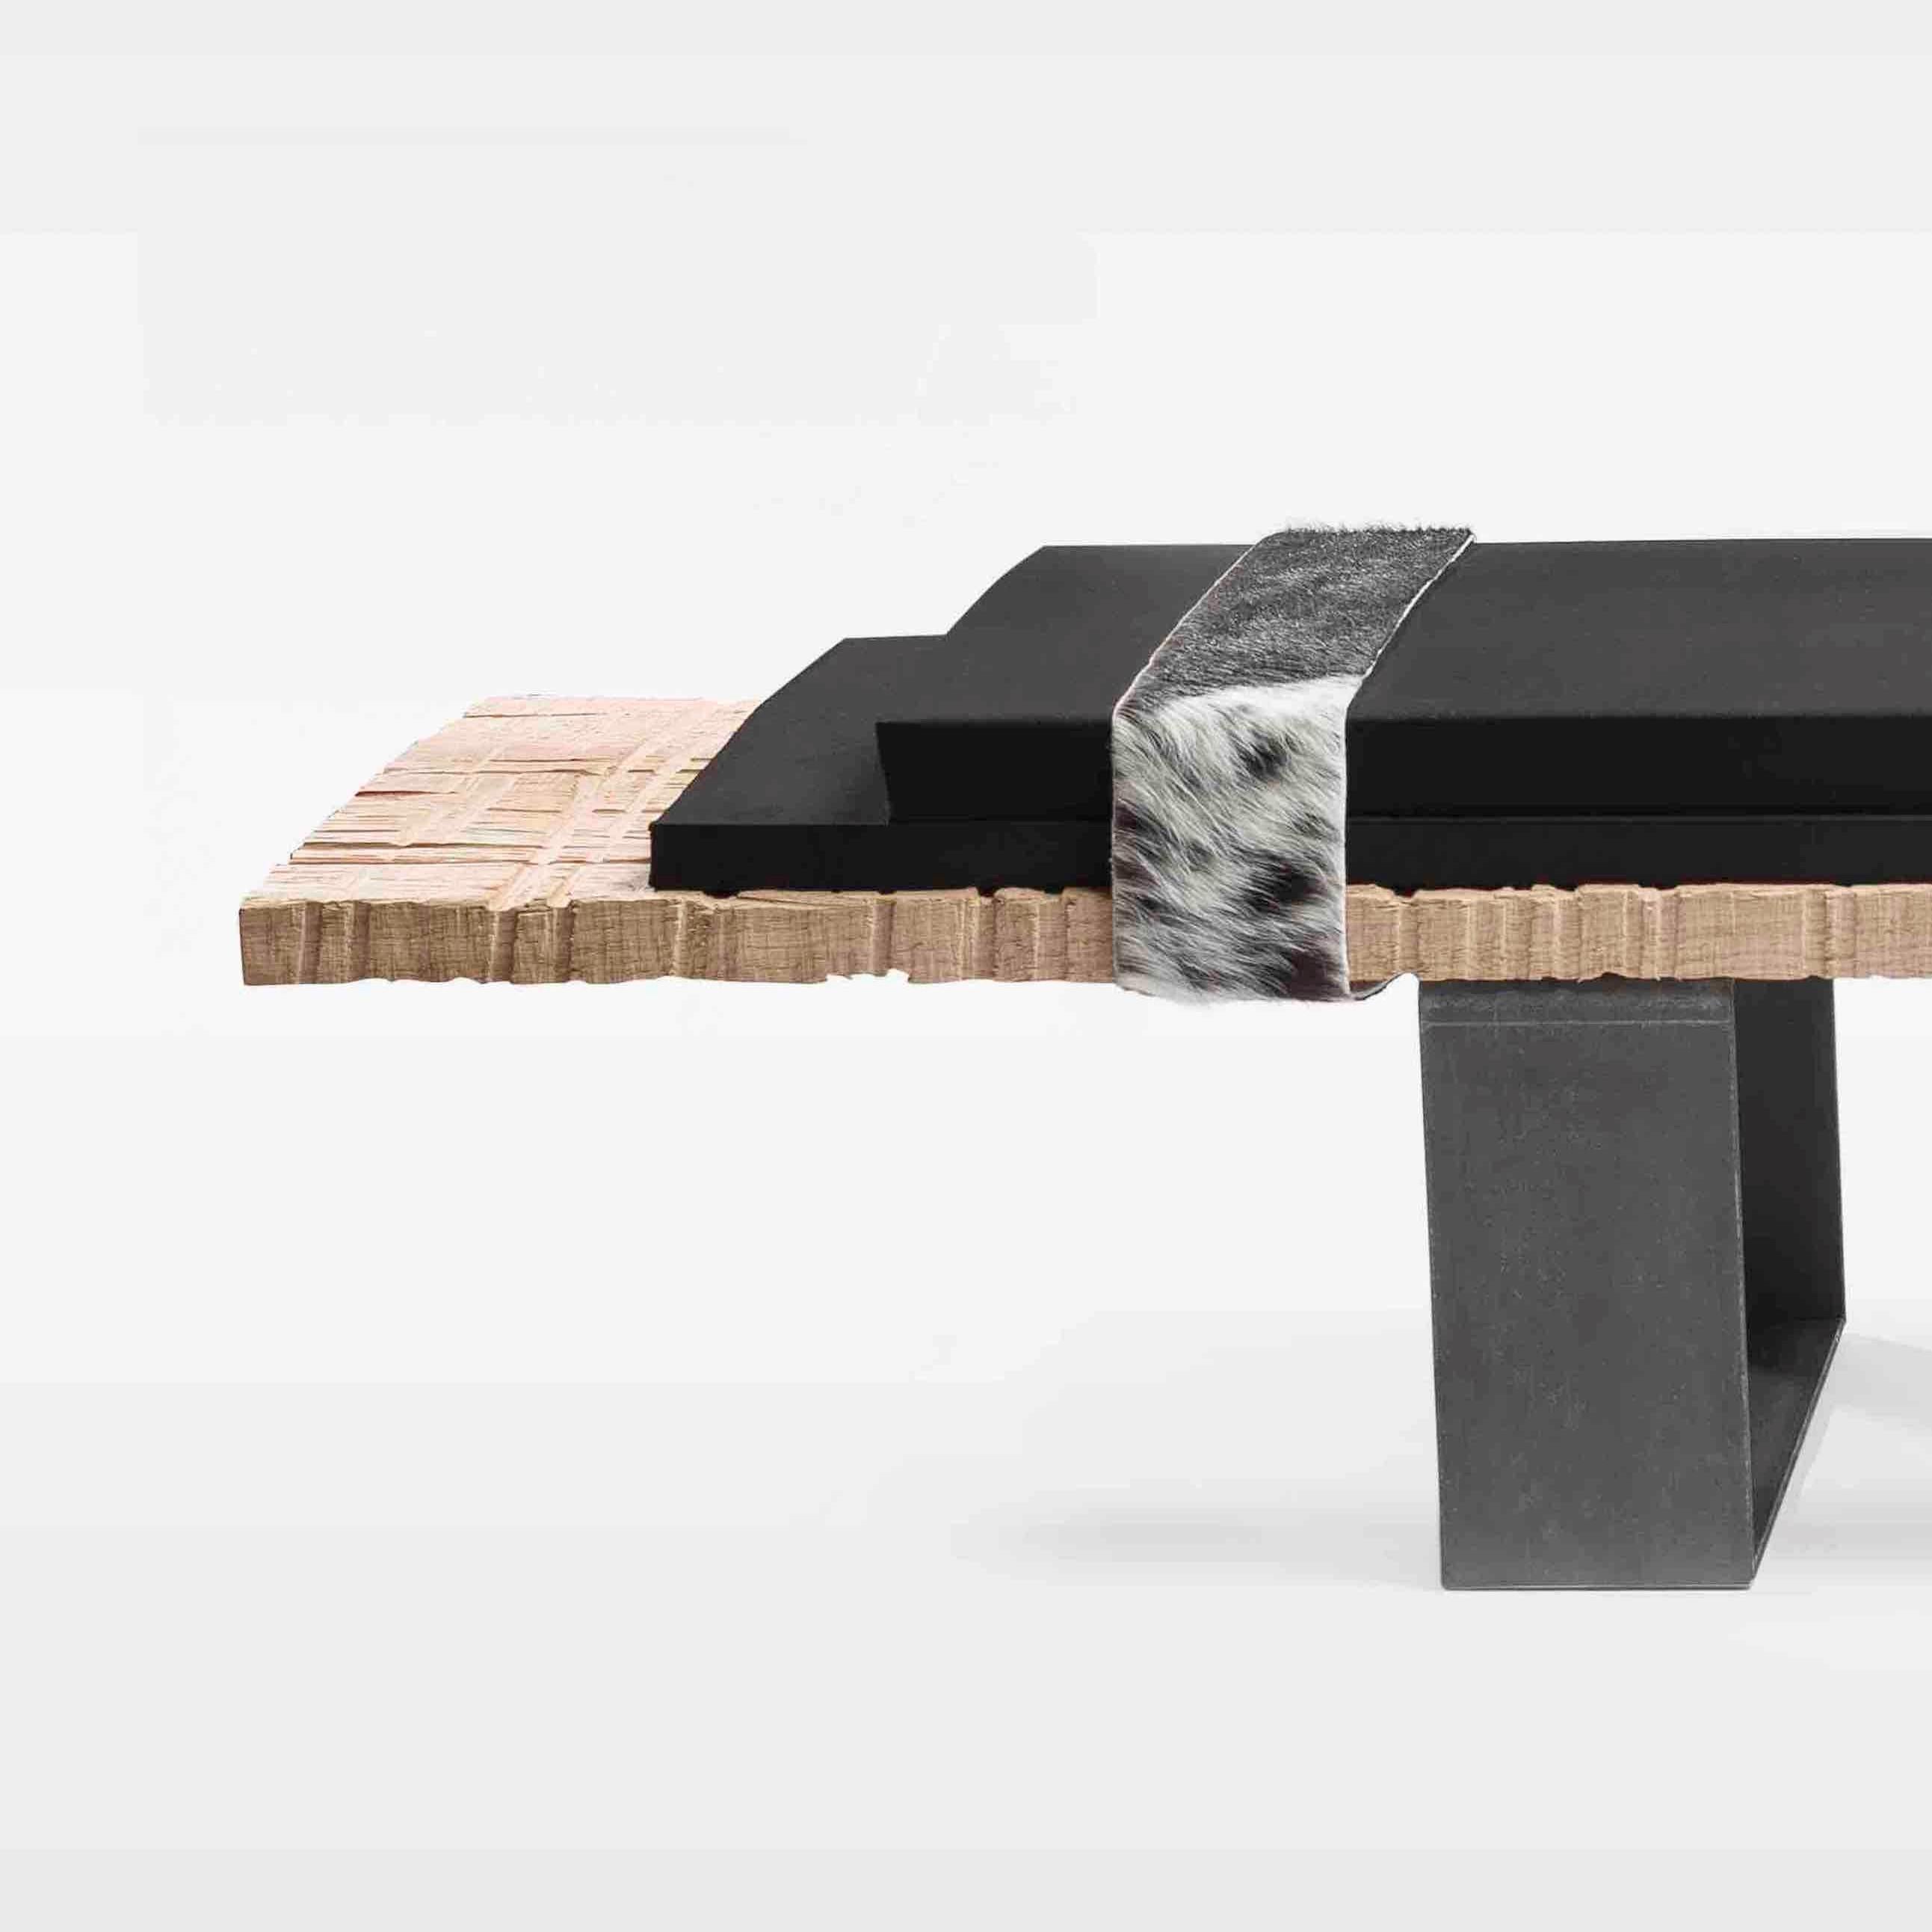 Numero 7 bench by STUDIO SOL LECCIA 
Dimensions: W 200 x D 38 x H 34 cm
Materials: Carved raw oak, EPDM foam leather, Skin, feet in oiled raw steel.
Options: burnt wood, brass foot (not included in price).

You can choose your own